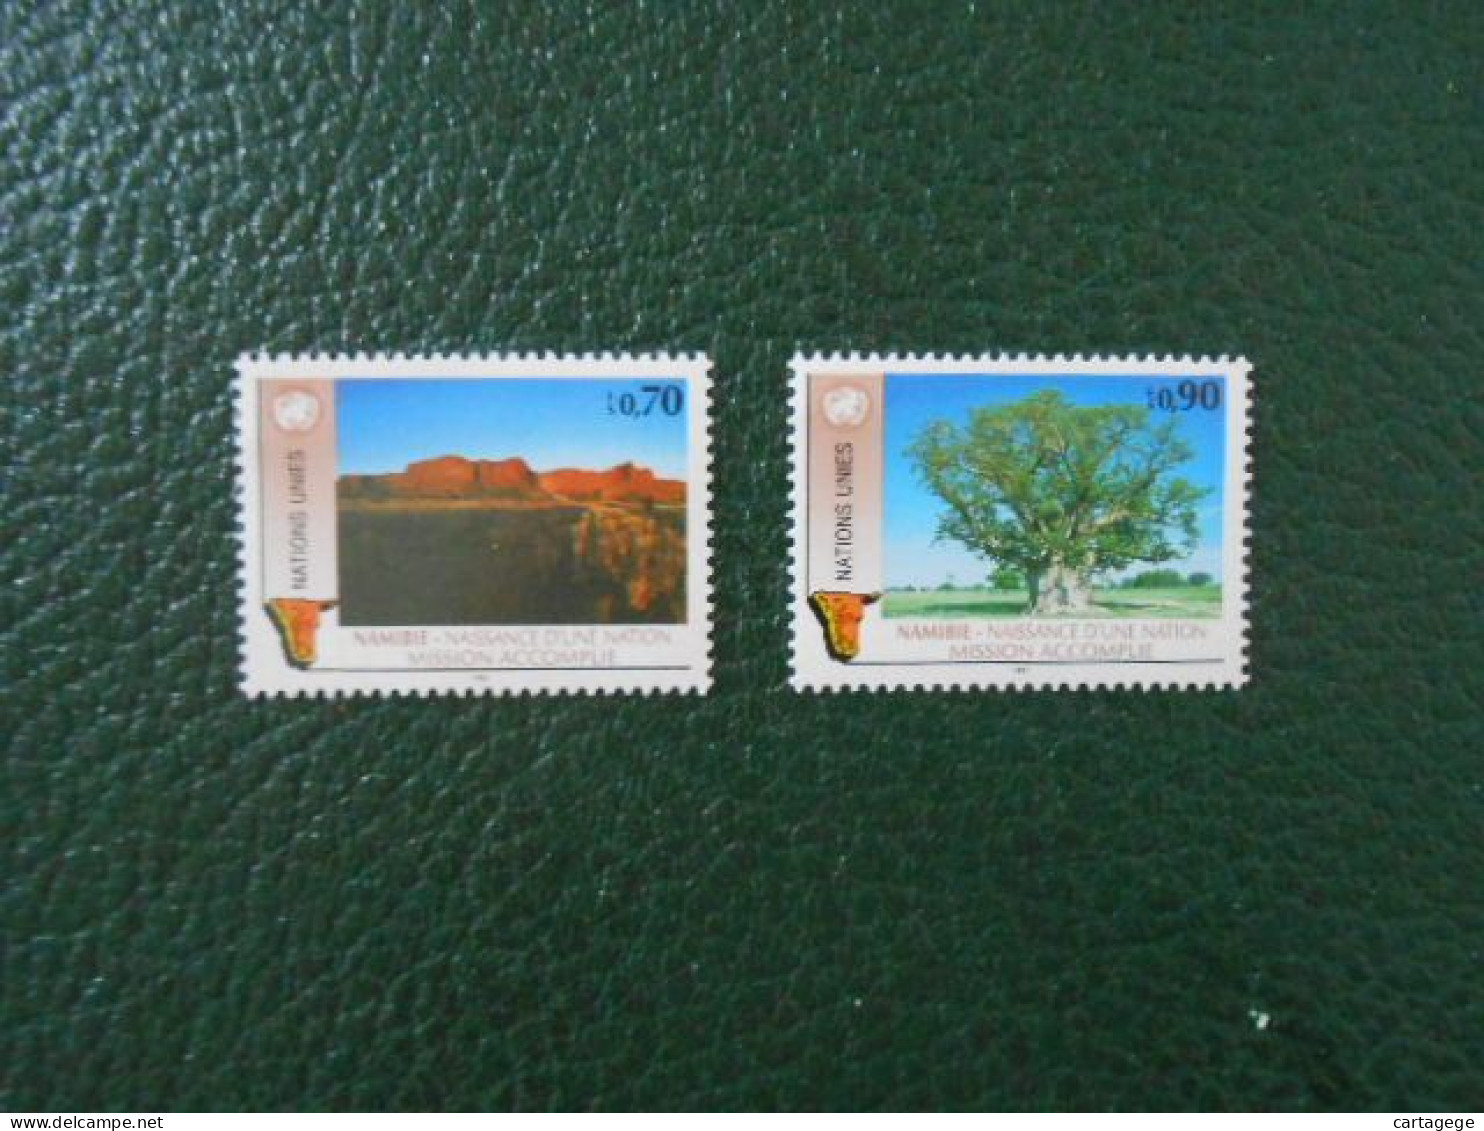 NATIONS-UNIES GENEVE YT 206/207 NAMIBIE - NAISSANCE D'UNE NATION** - Unused Stamps